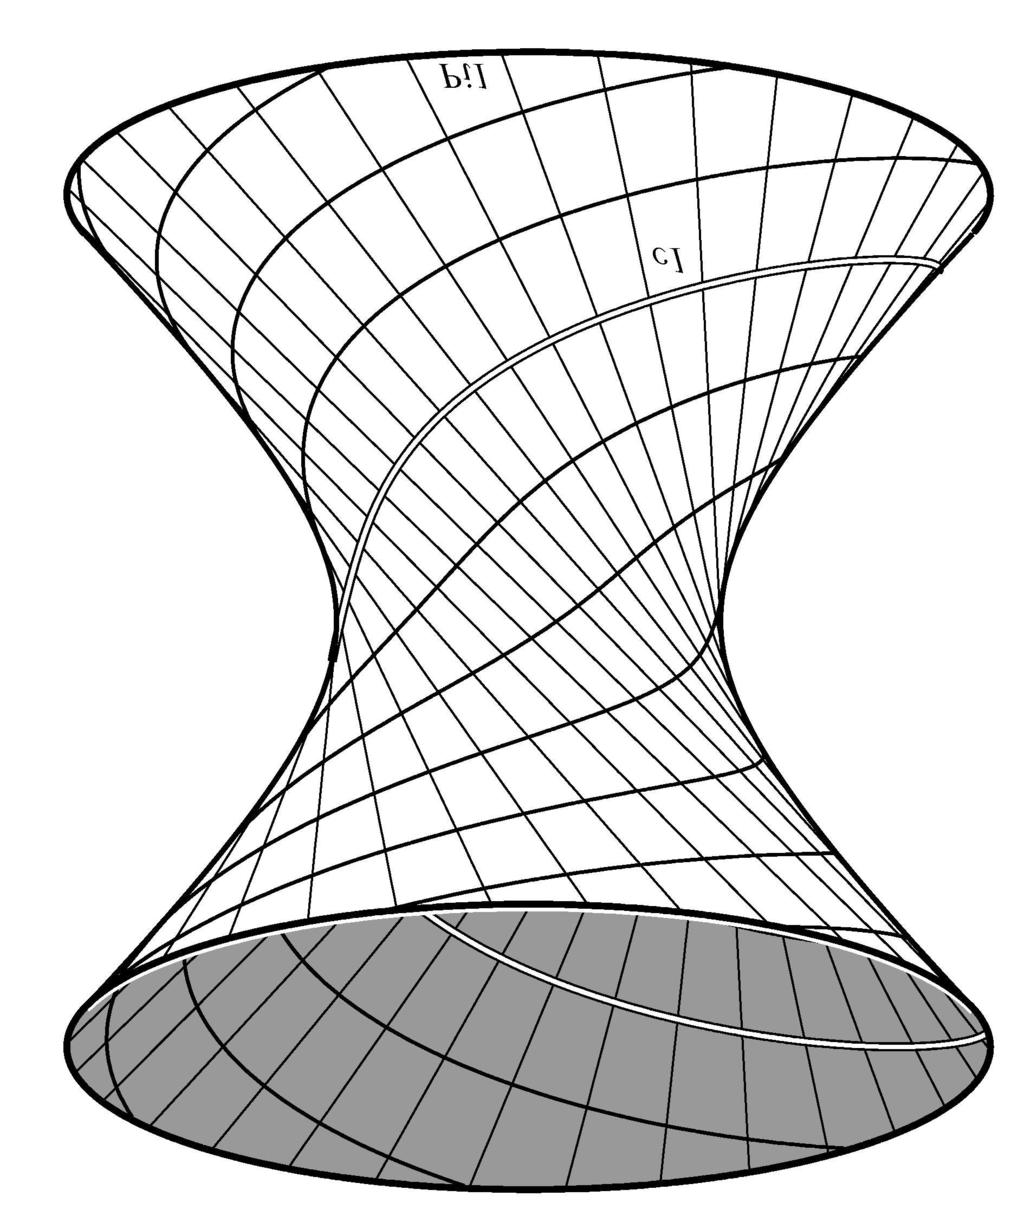 H. Stachel: On Spatial Involute Gearing 35 Figure 6: Slip tracks c 1 as orthogonal trajectories on the one-sheet hyperboloid Π 1 in the plane z = 0 on the x-axis can be parametrized as c 1 (t): x(t)